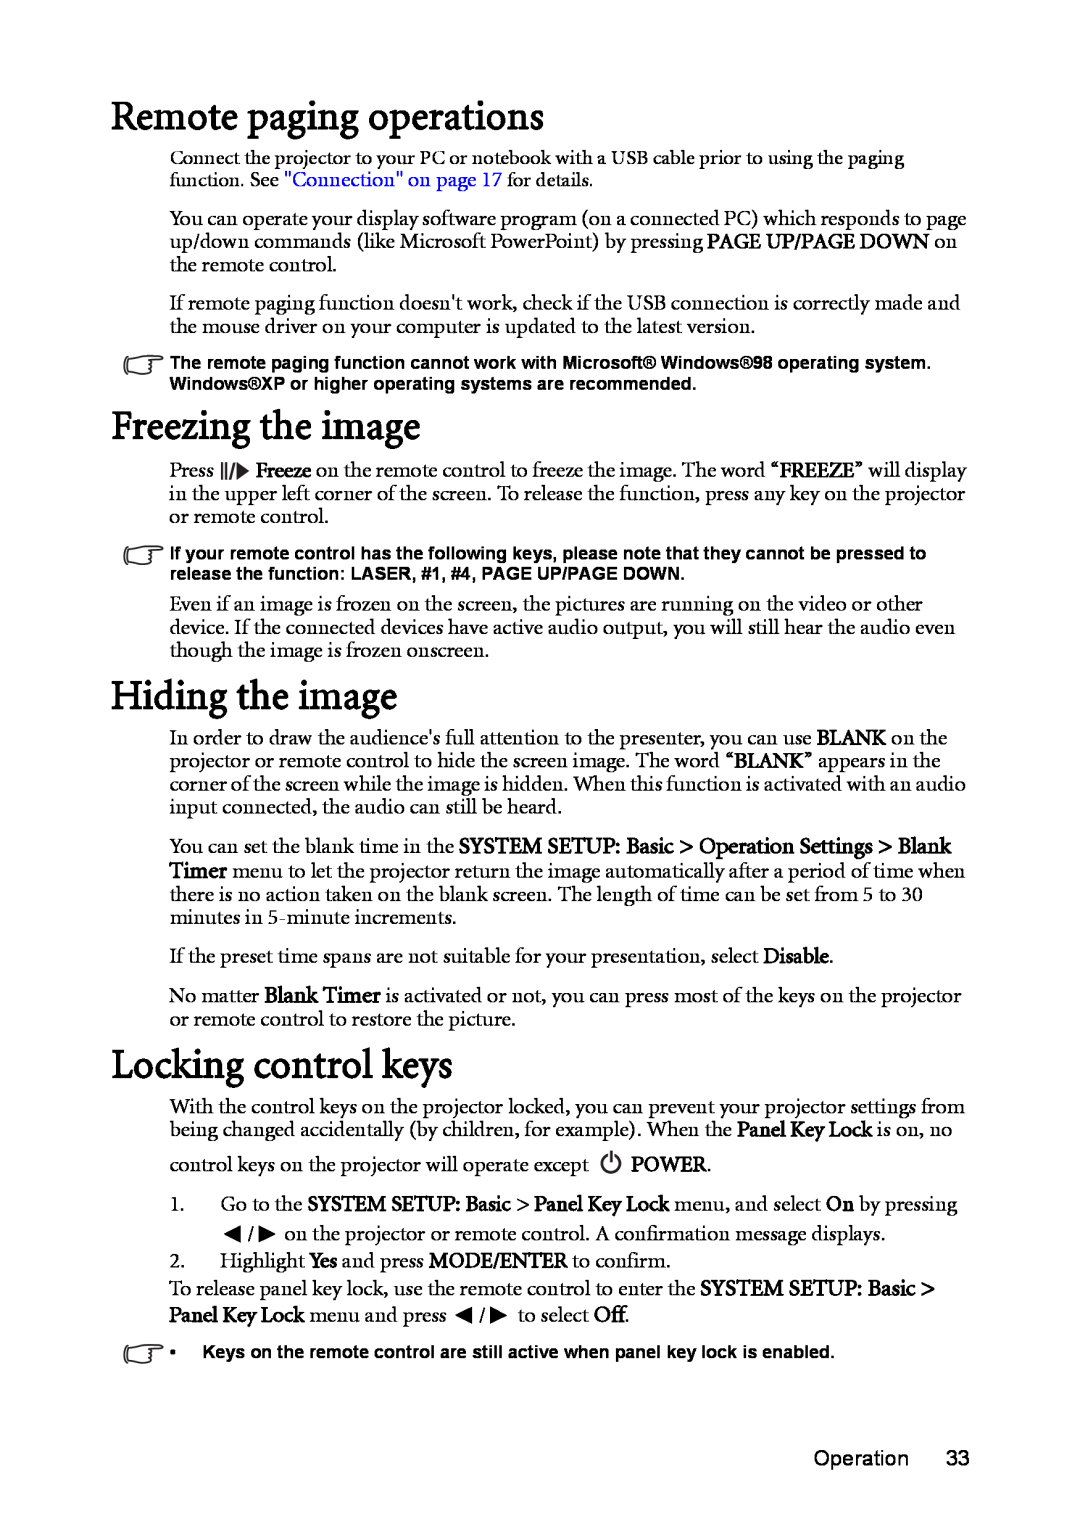 BenQ mw814st user manual Remote paging operations, Freezing the image, Hiding the image, Locking control keys 